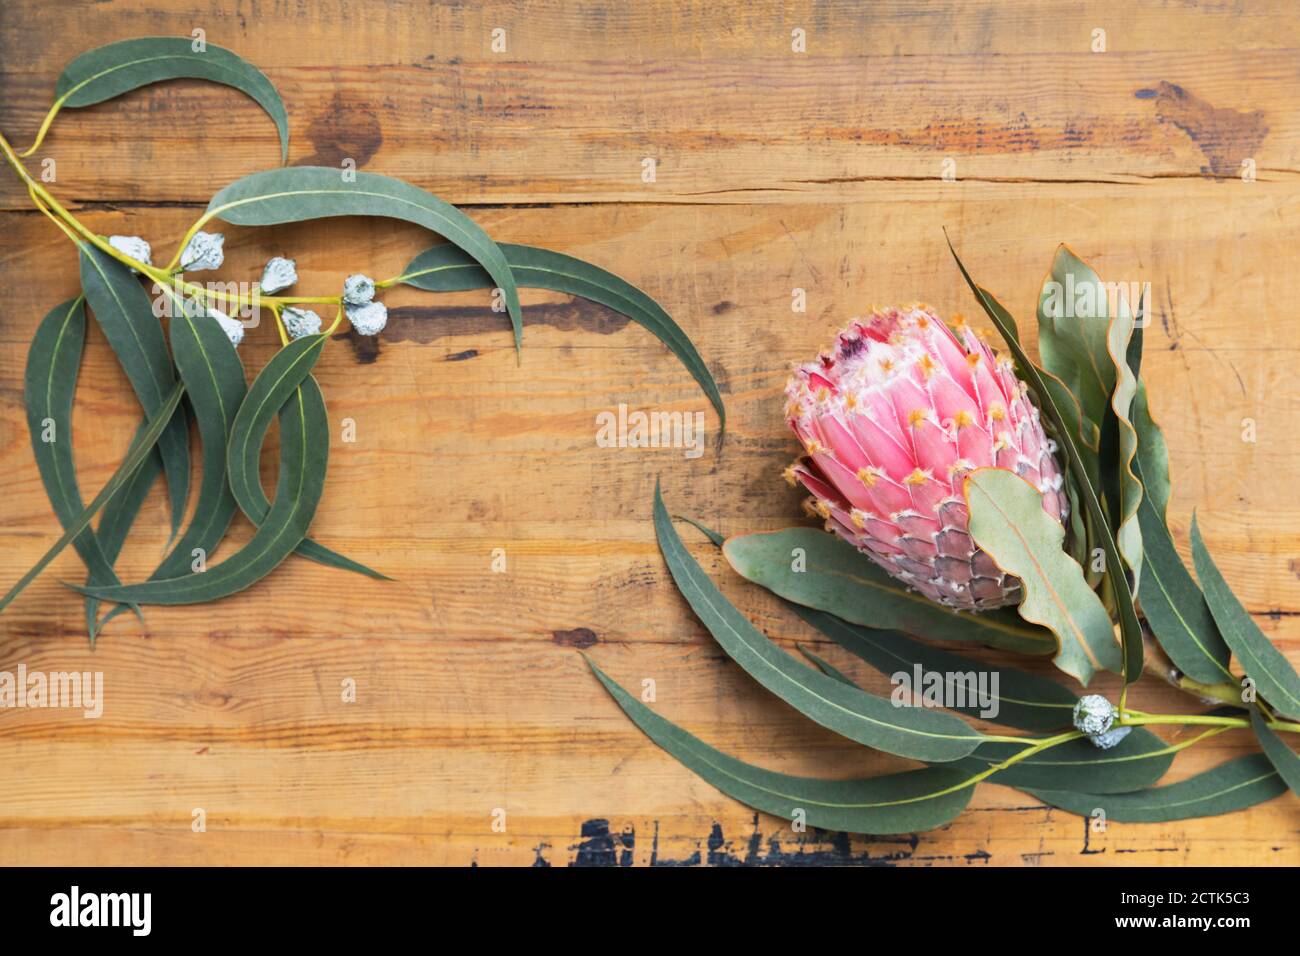 Protea flower and branch of southern blue gum (Eucalyptus globulus) on wooden surface Stock Photo